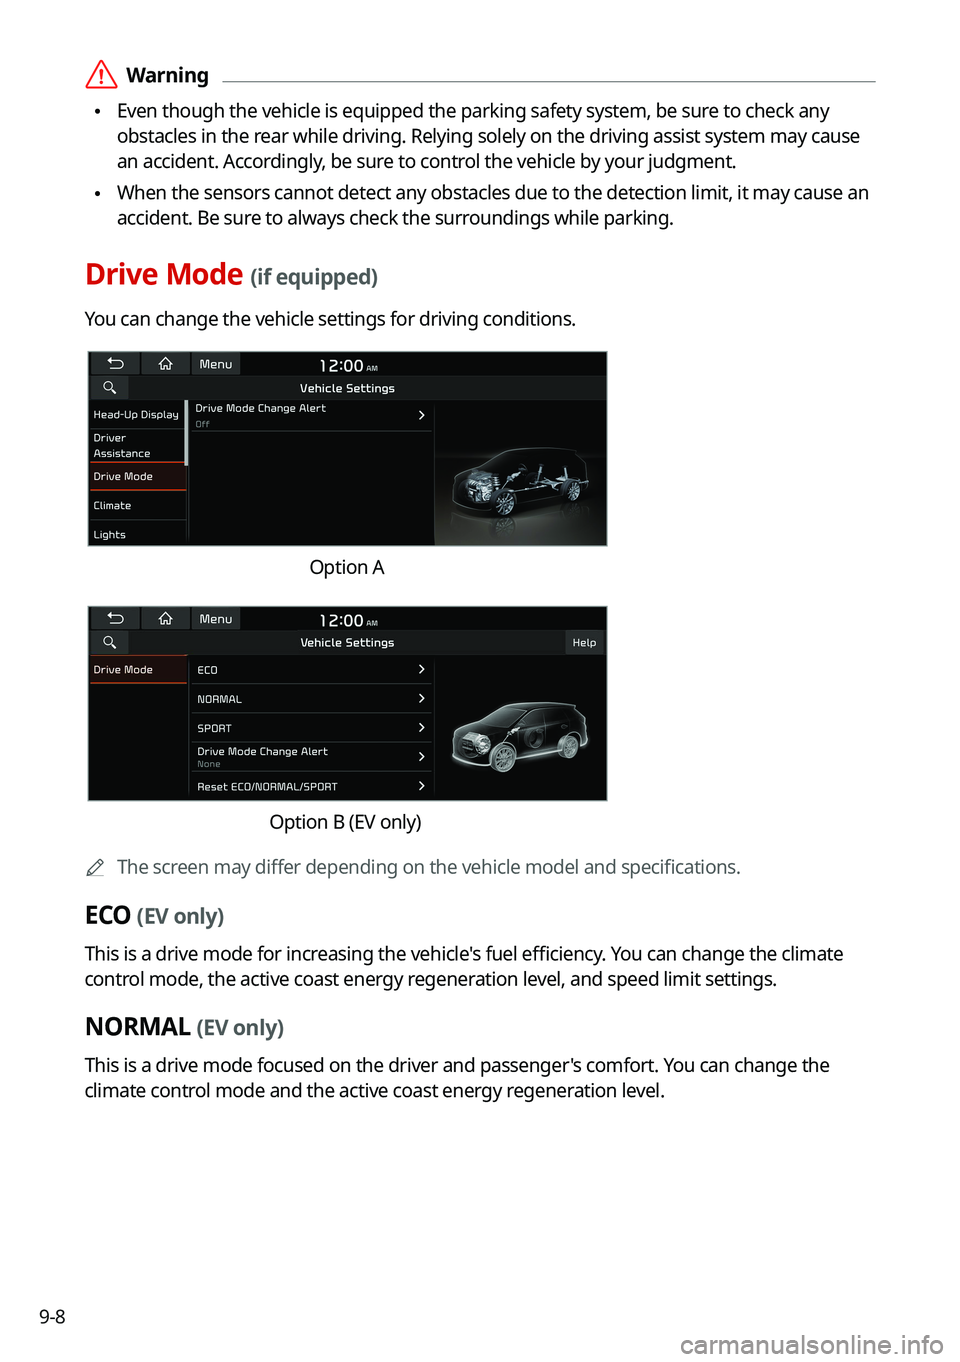 KIA NIRO PHEV 2021  Navigation System Quick Reference Guide 9-8
 \335Warning
 \225Even though the vehicle is equipped the parking safety system, be sure to check any 
obstacles in the rear while driving. Relying solely on the driving assist system may cause\
 